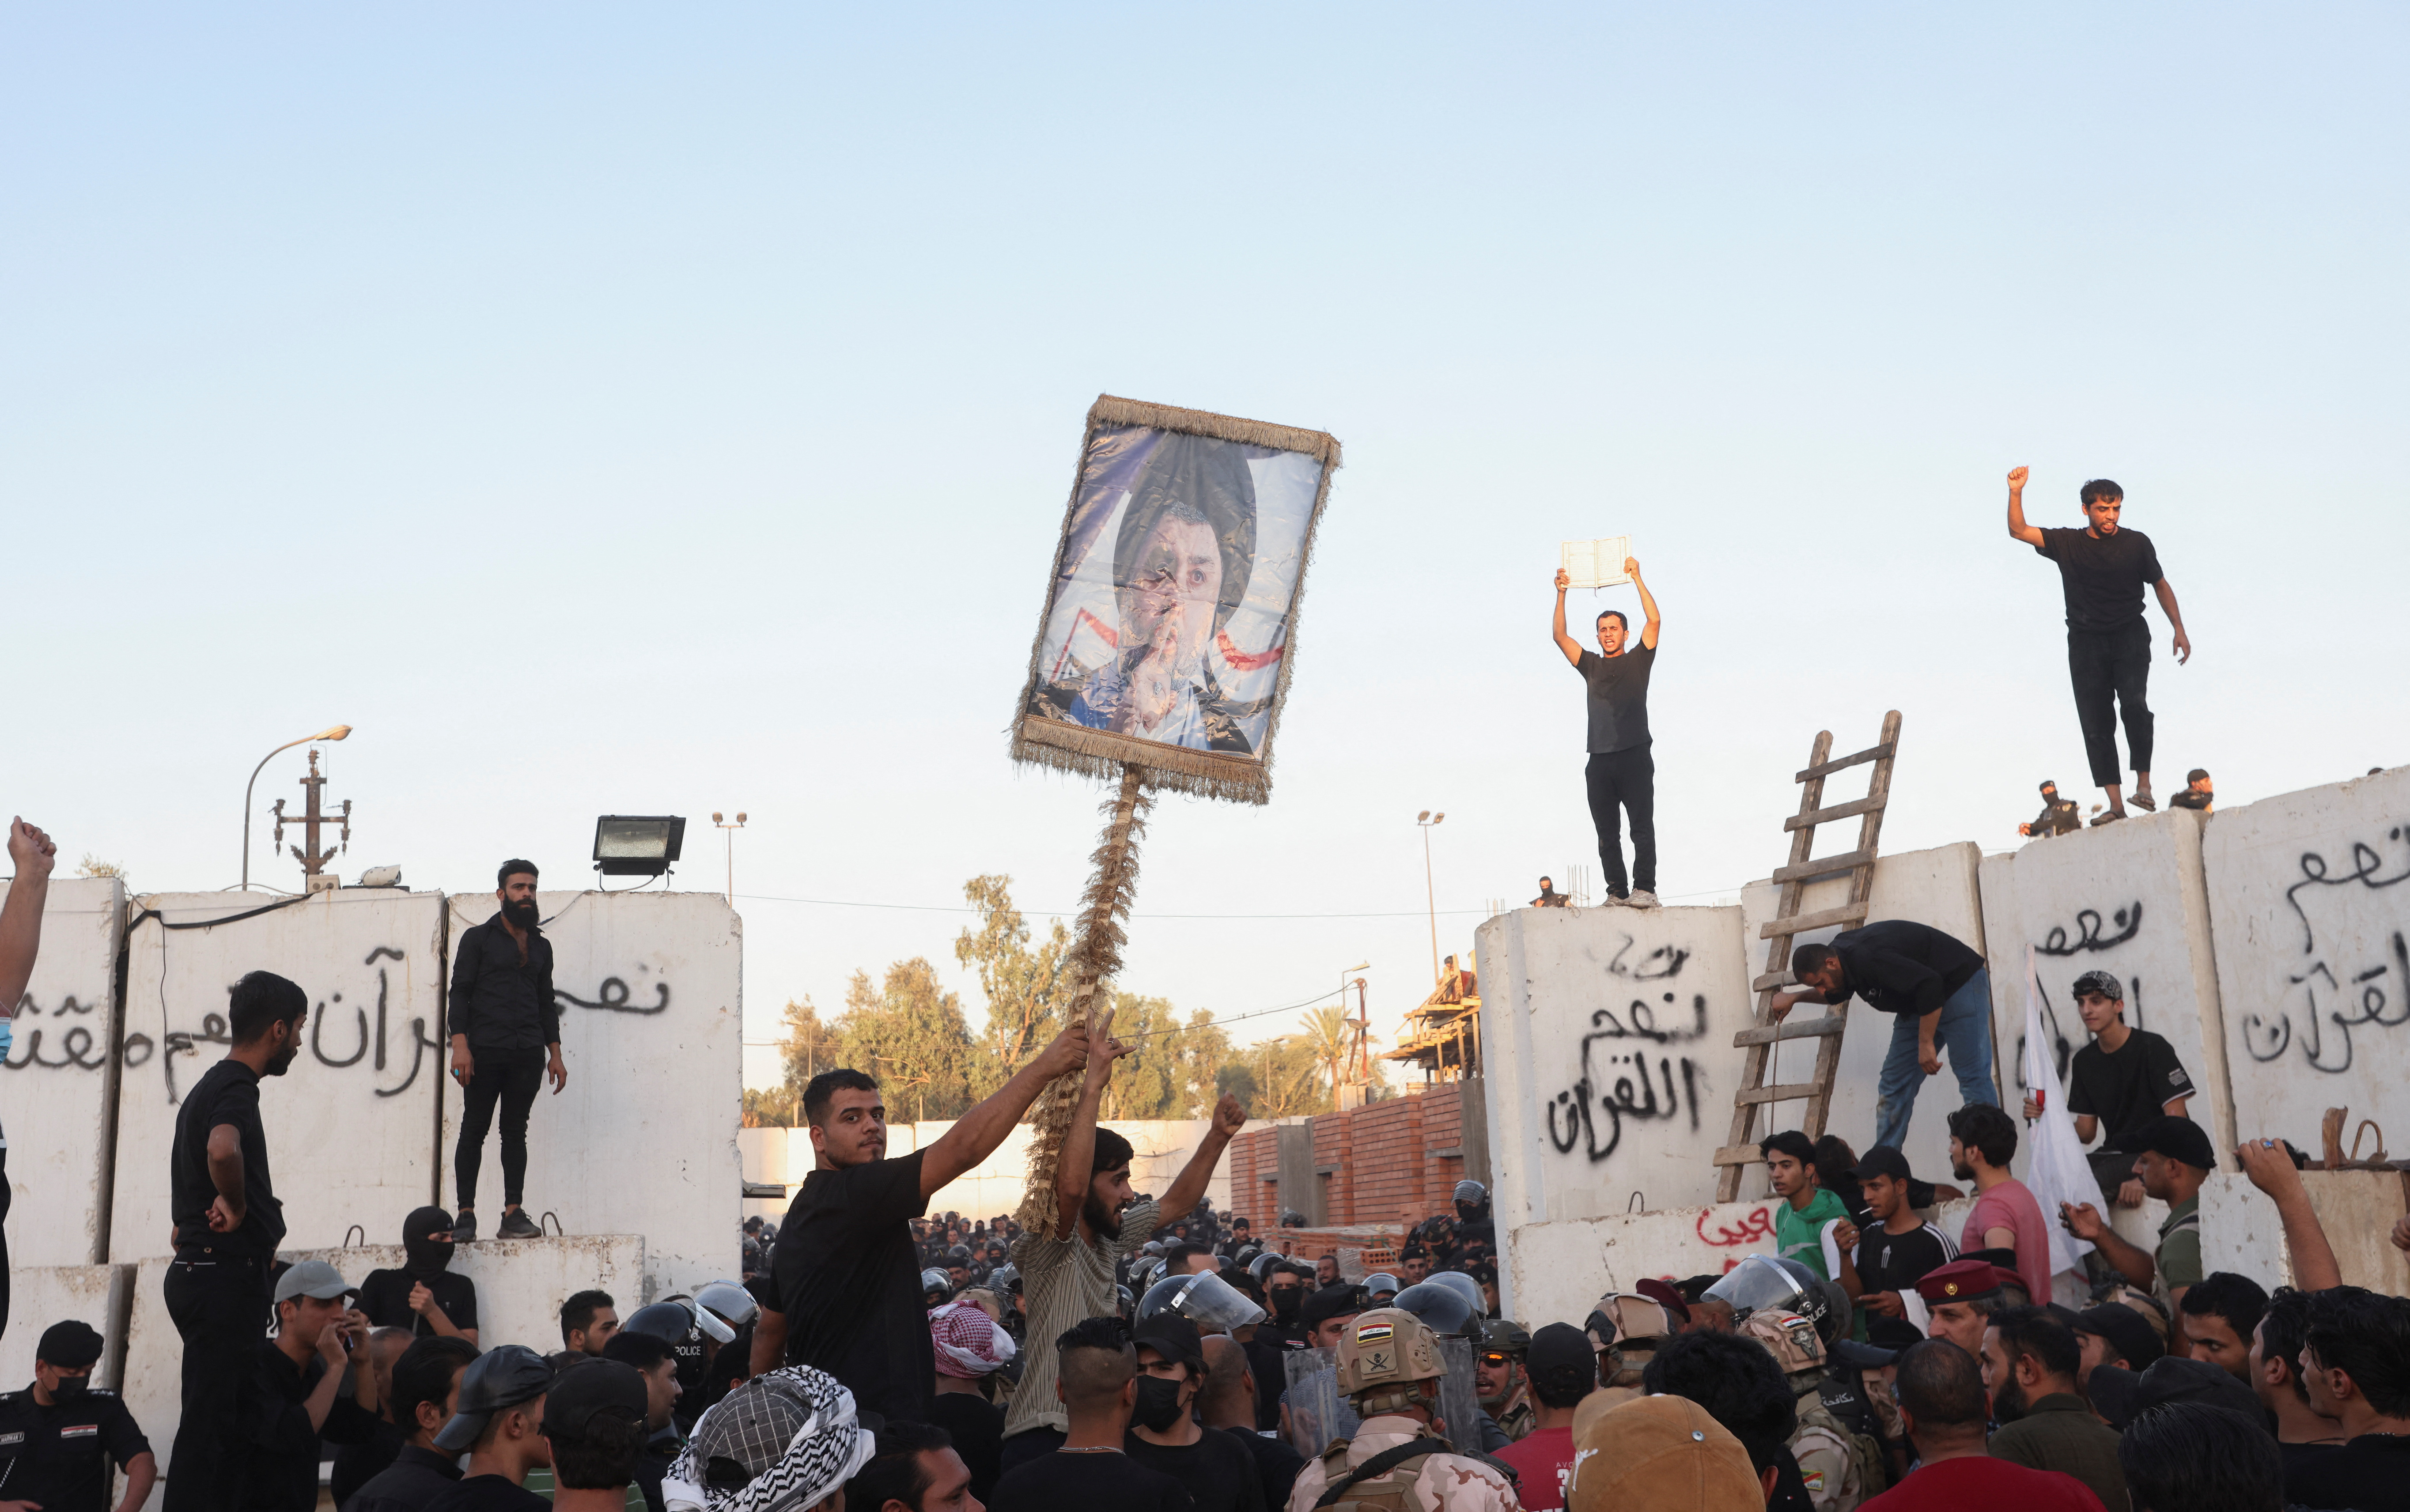 Protesters gather near the Swedish embassy in Baghdad